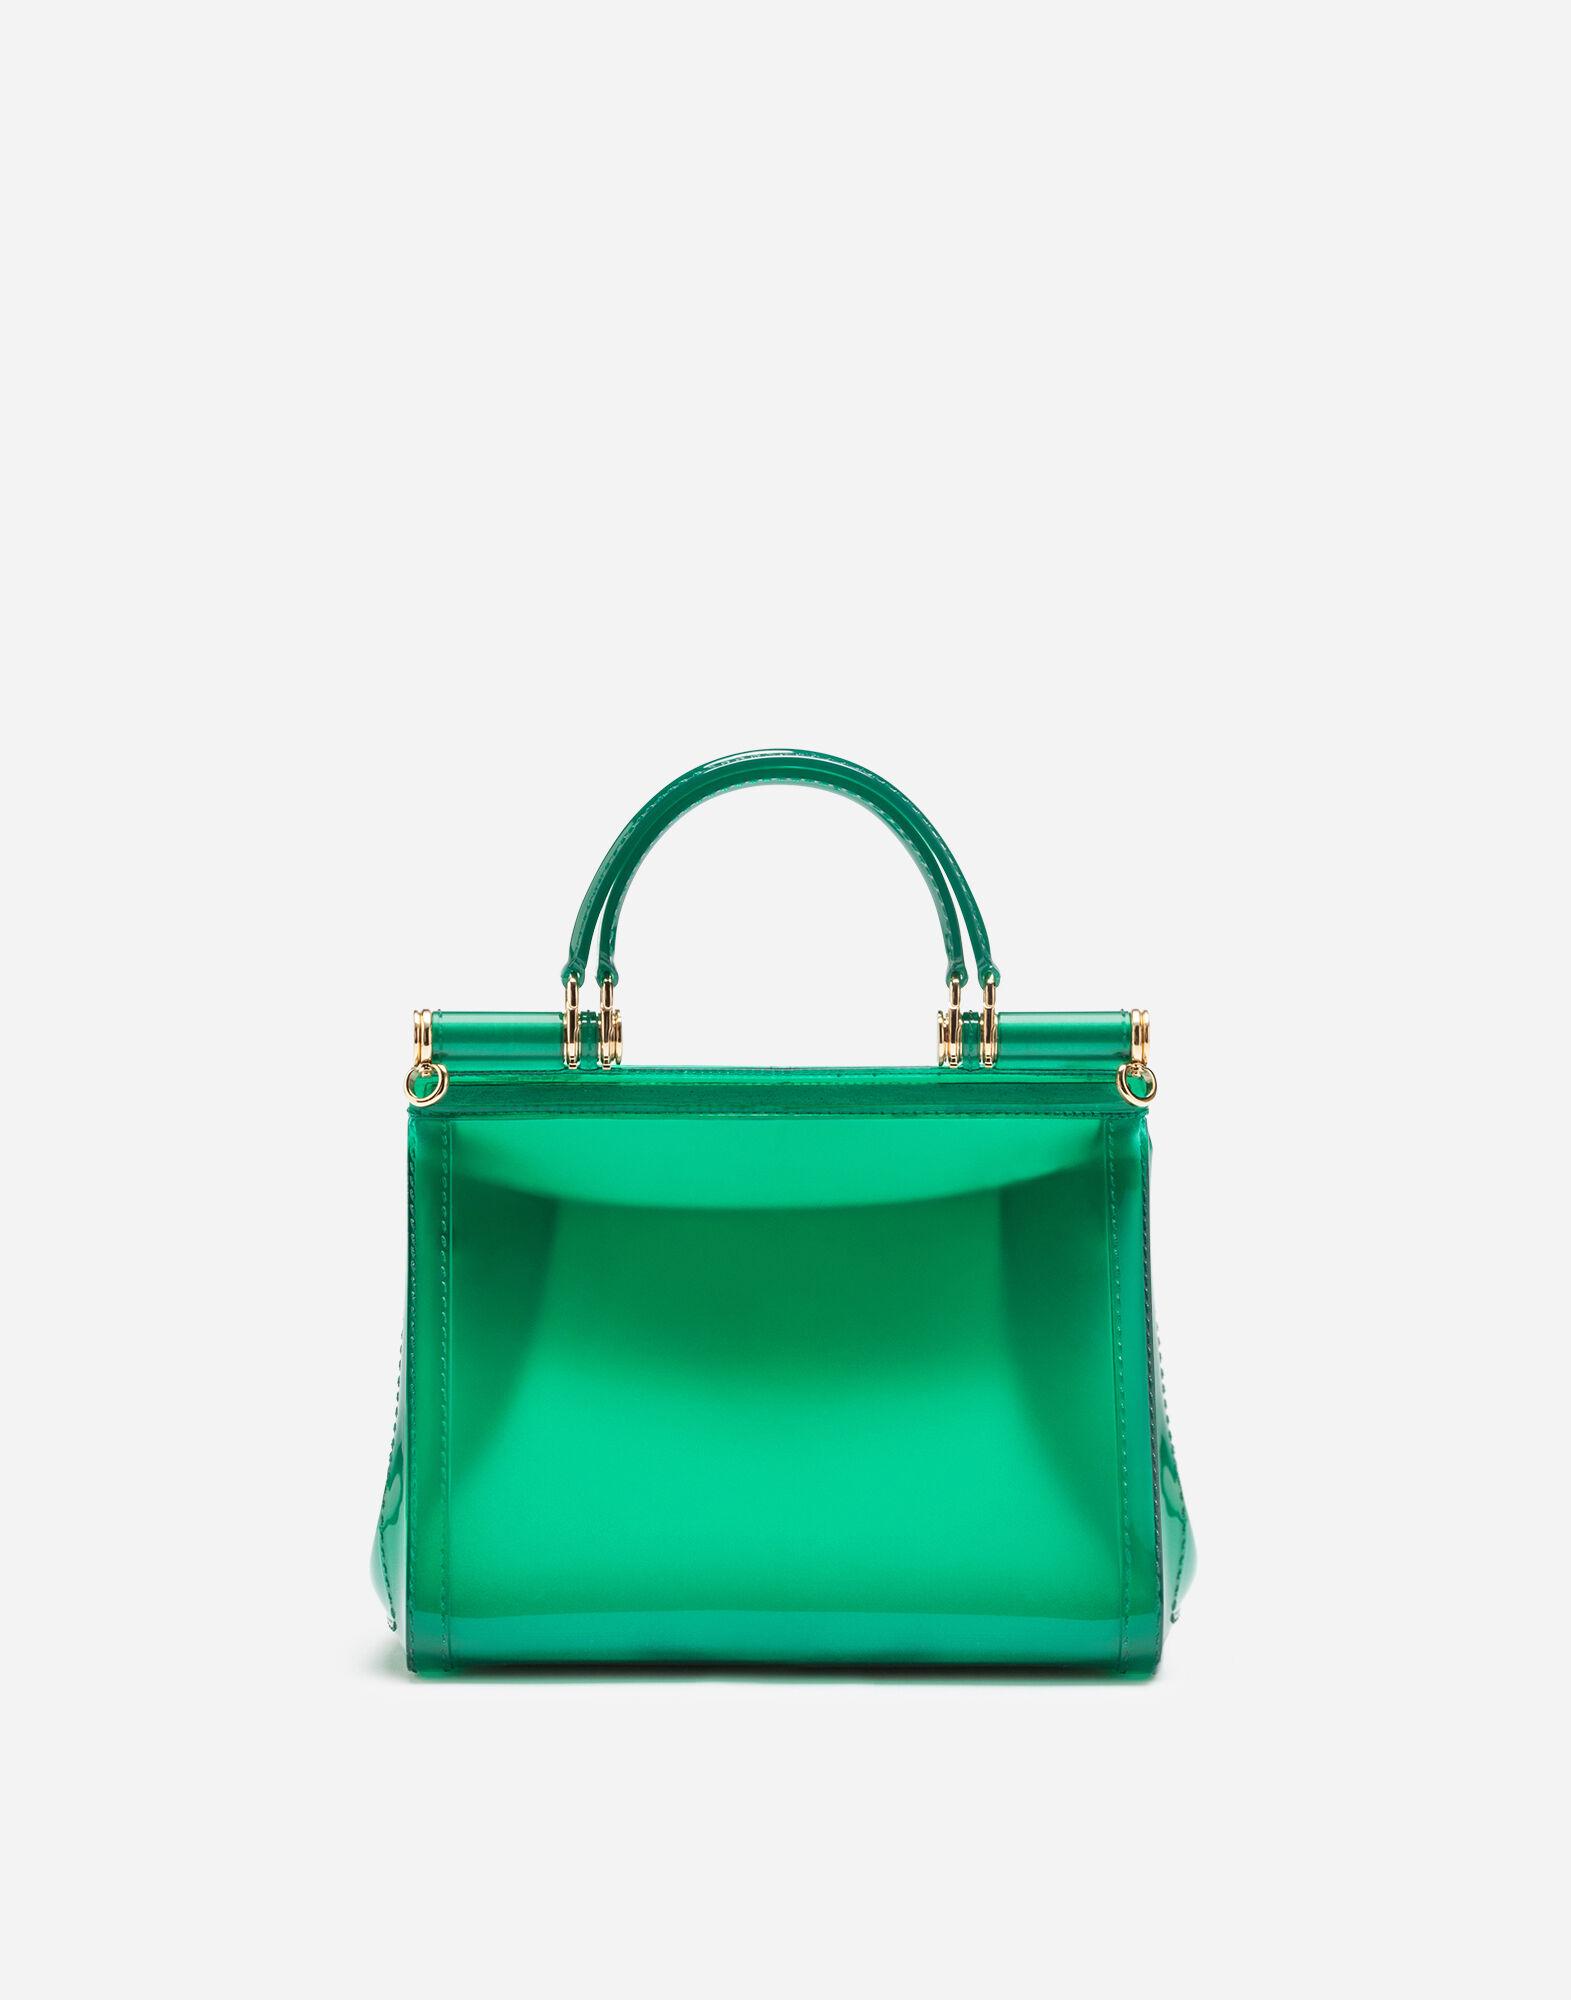 Dolce & Gabbana Sicily Translucent Top Handle Bag in Green | Lyst